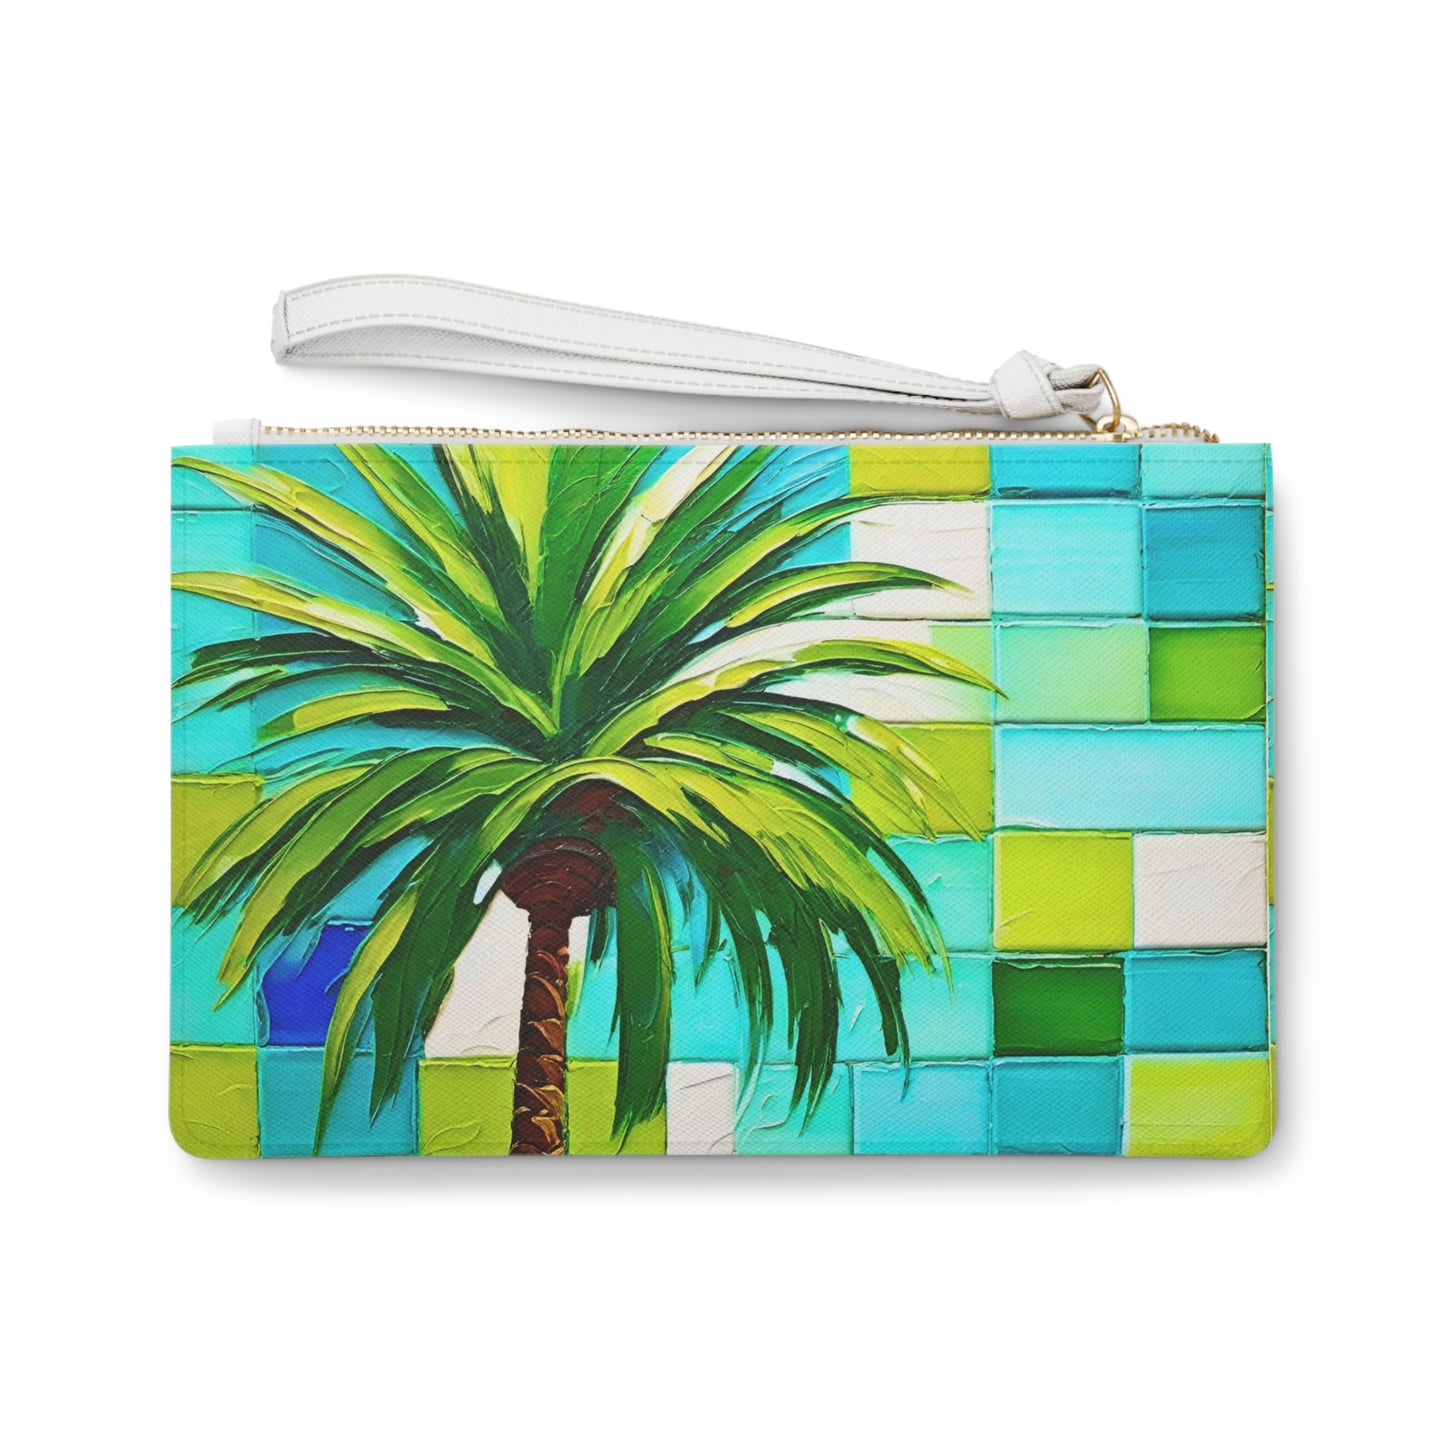 Turks and Caicos Palm Tree Poolside Tile Ocean Vacation Travel Pouch Clutch Bag